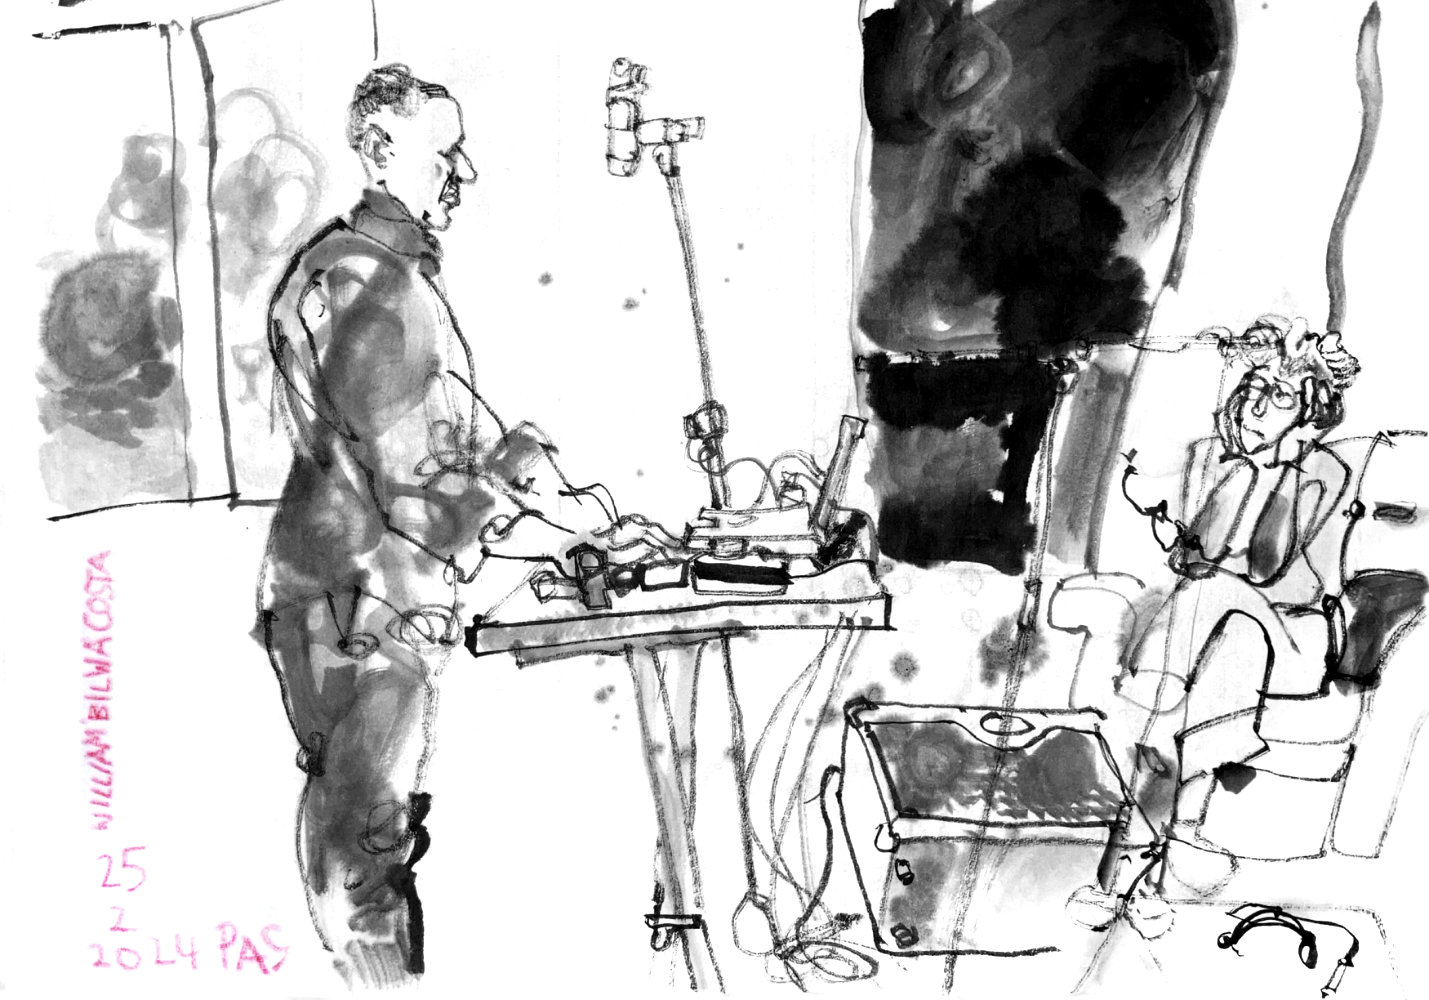 Ink drawing of a musician at a desk with electronic devices, two amplifiers with a microphone hanging inbetween at his cable from a mic-stand. On the right is a woman from the audience sitting in an armchair, covering her ears with the hands.